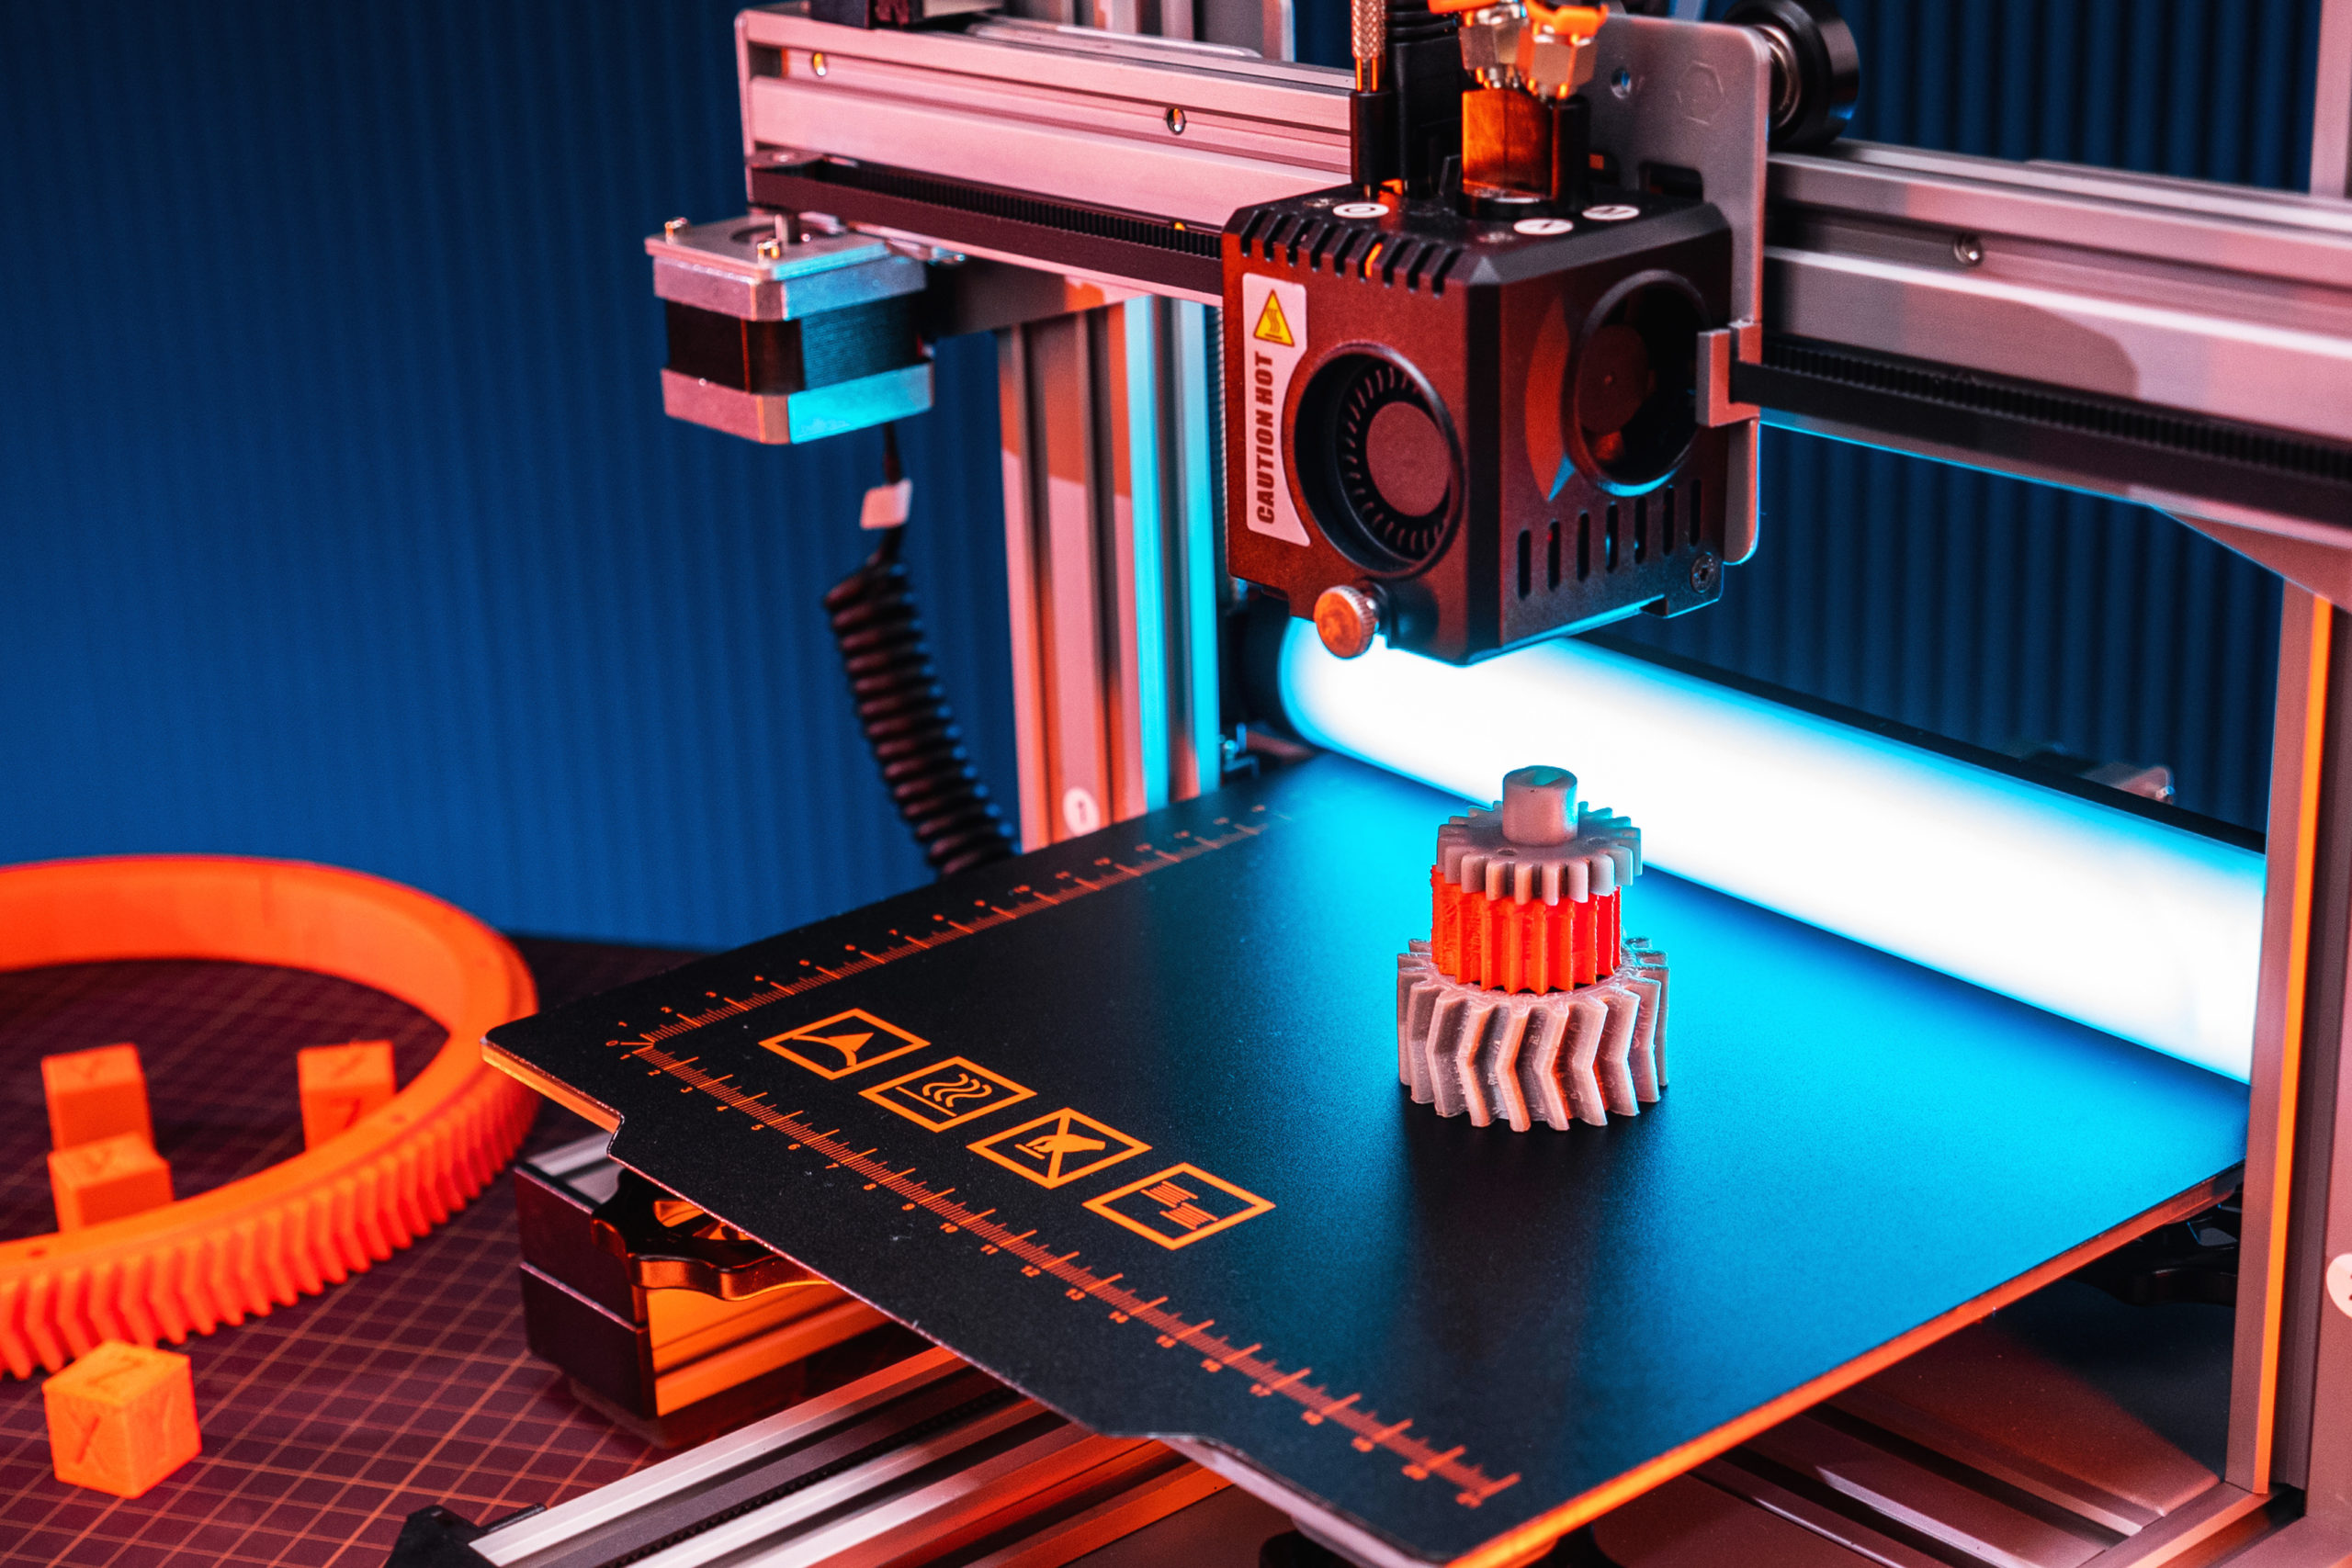 3D printing in action, product development